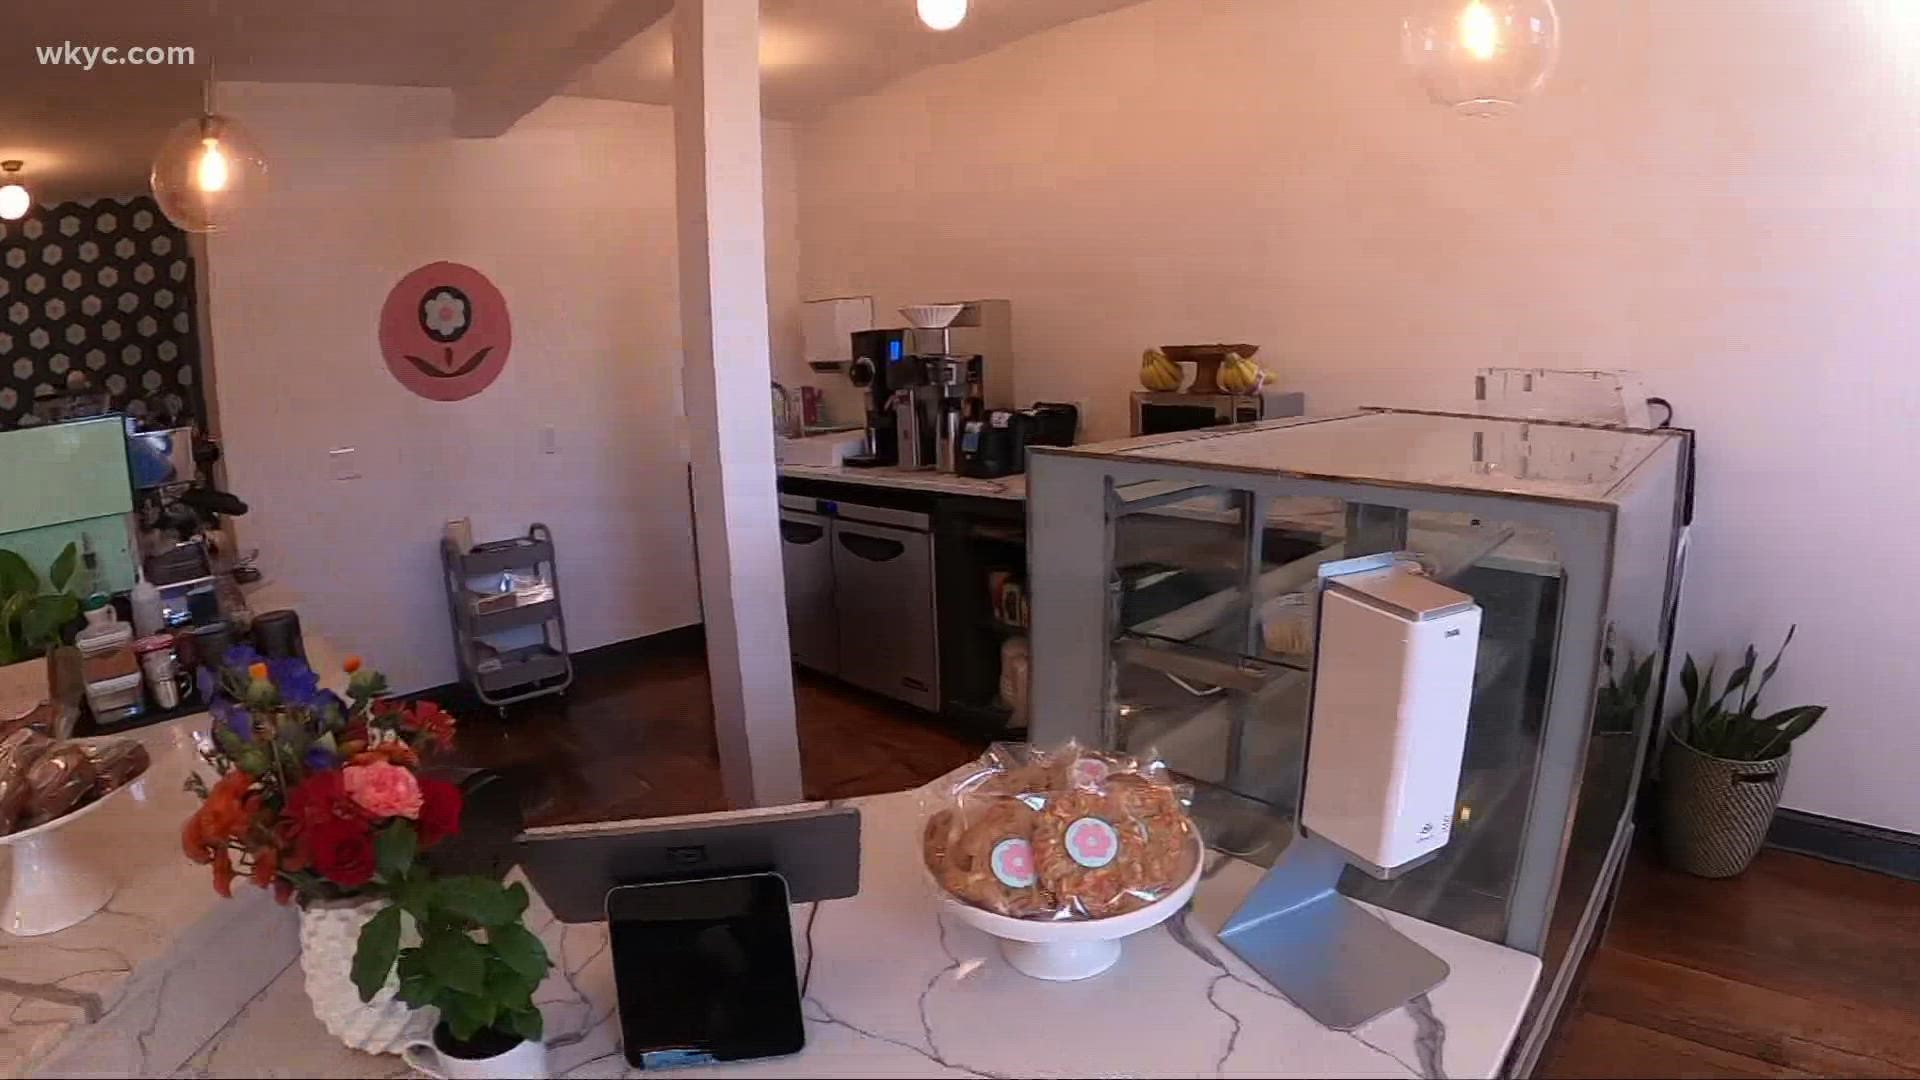 The bakery is bringing even more new life to the quickly-growing neighborhood near MetroHealth. Doug Trattner has your front row look at Floressa Cafe and Bakery.